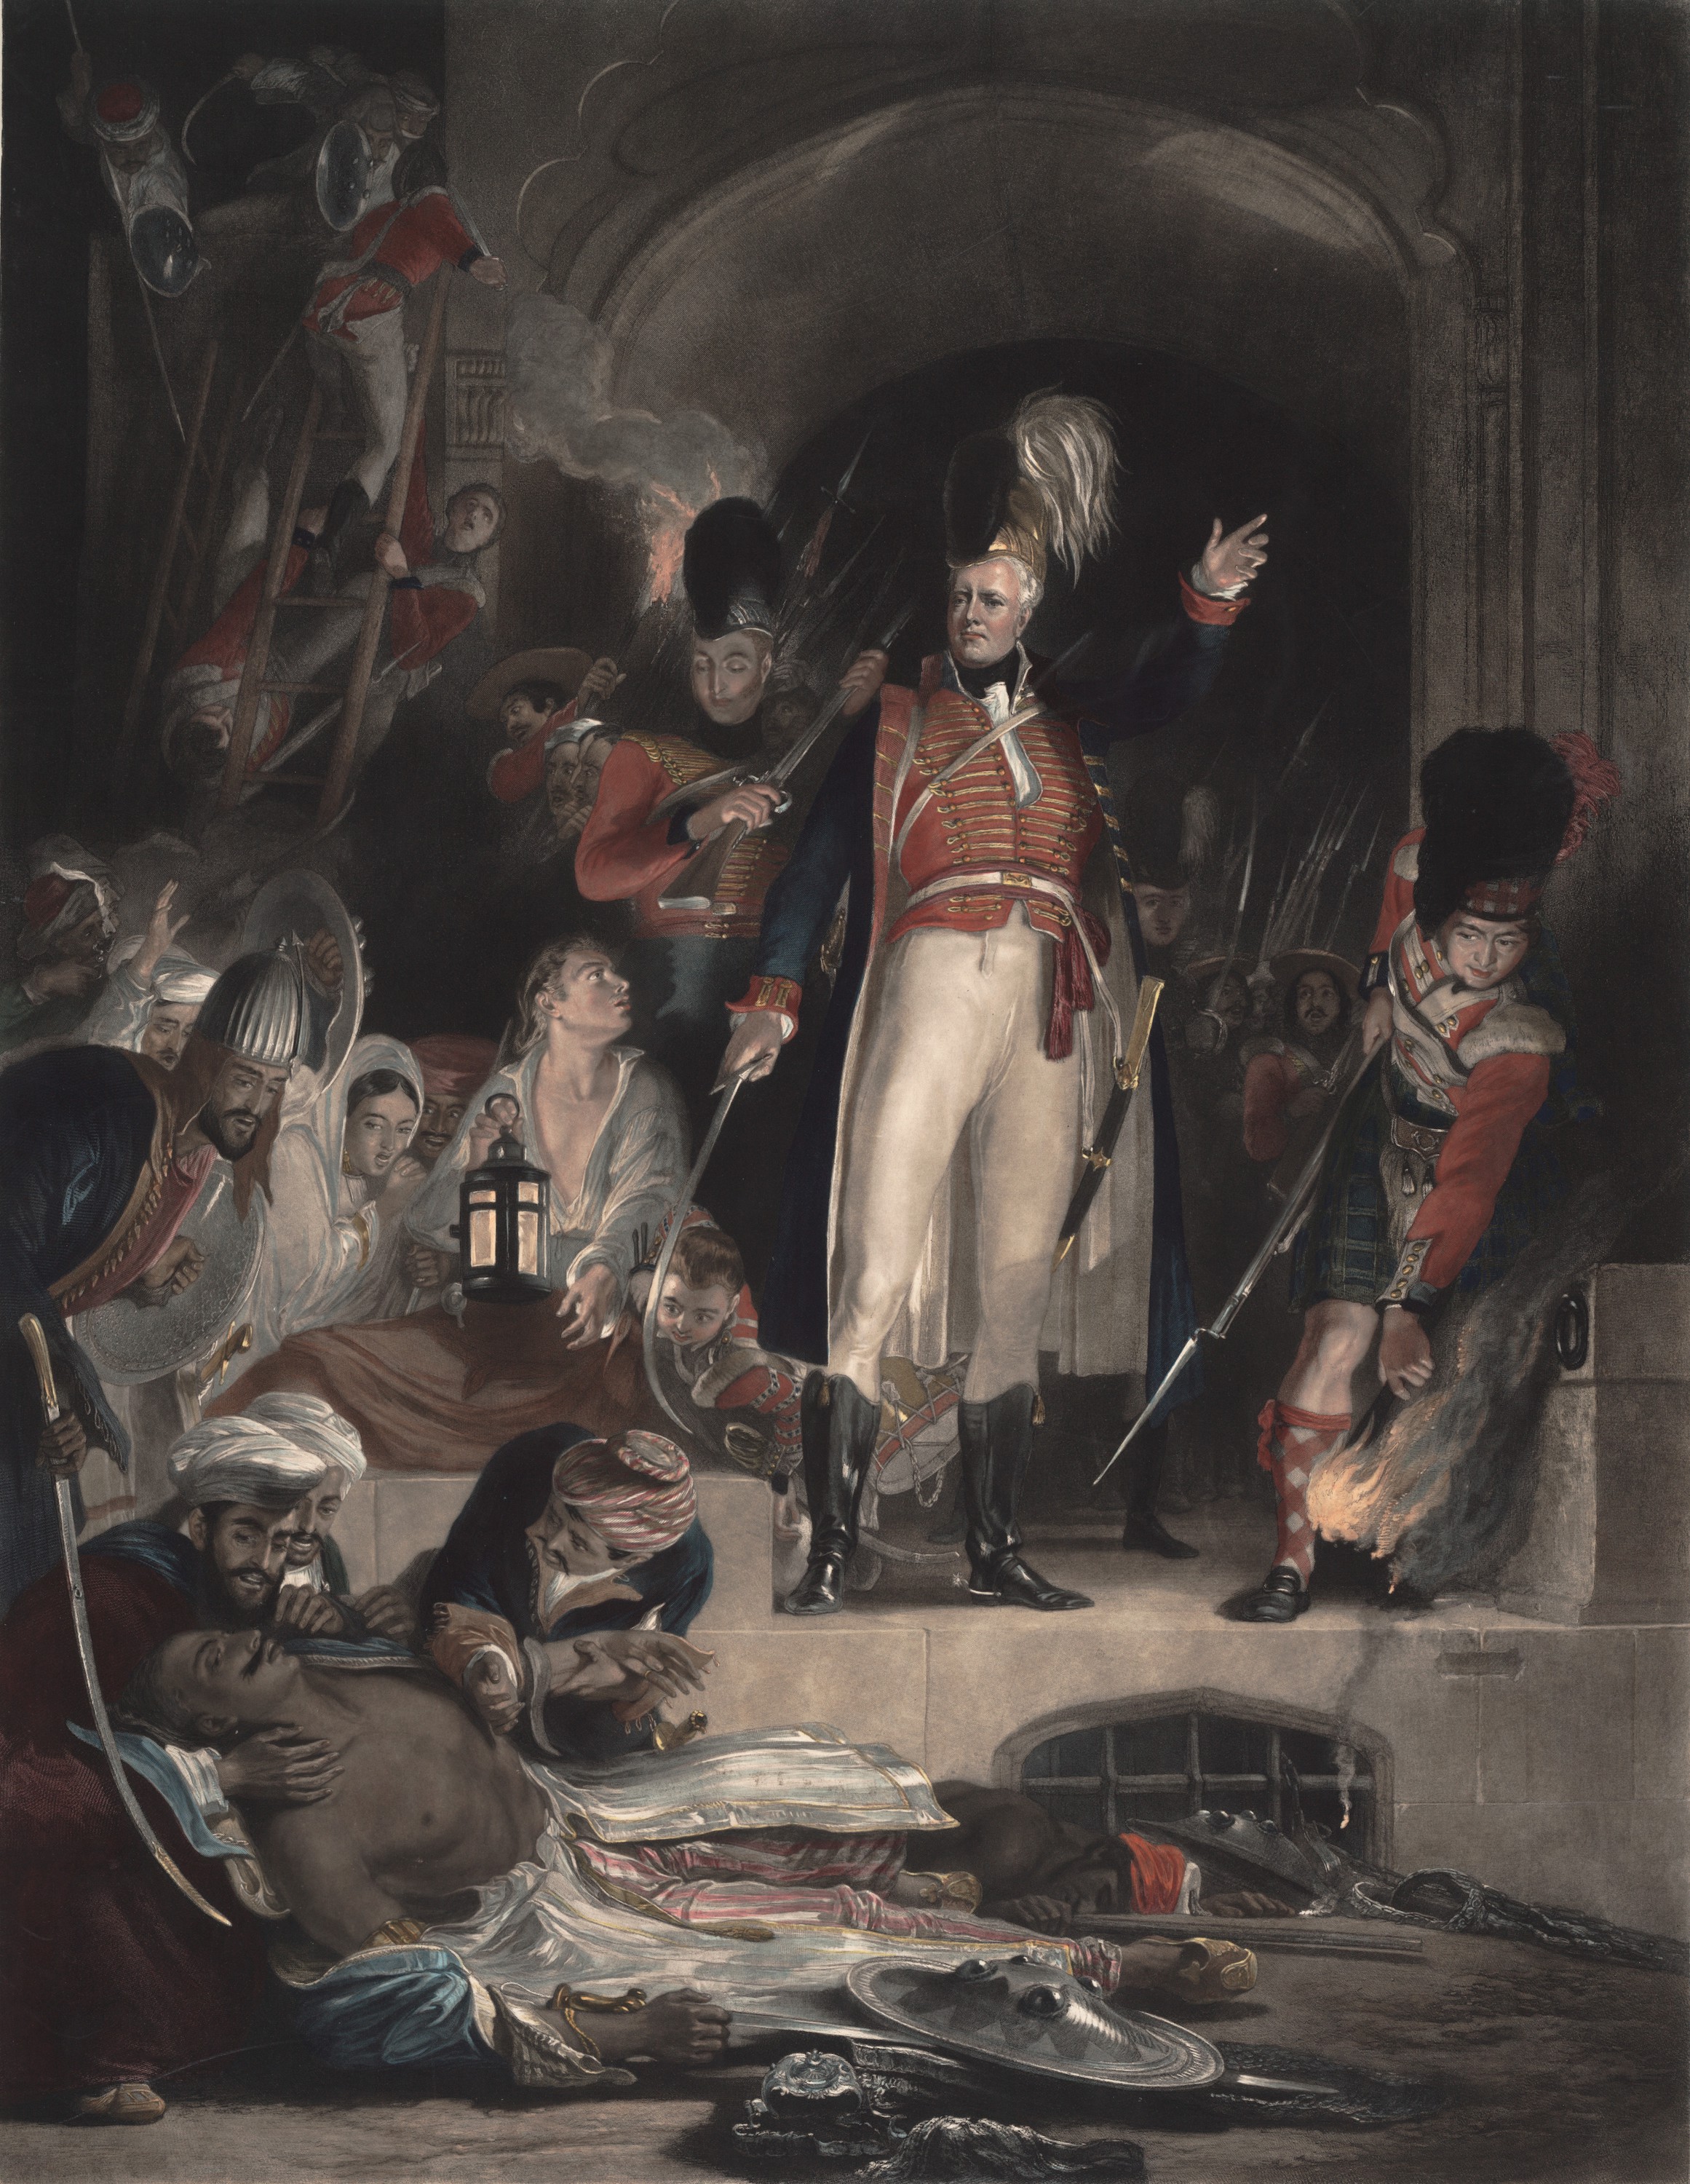 General Sir David Baird Discovering the Body of Sultan Tippoo Sahib after having Captured Seringapatam, on the 4th May, 1799 by Sir David Wilkie - ca. 1830 - 348.5 x 267.9 cm National Galleries of Scotland